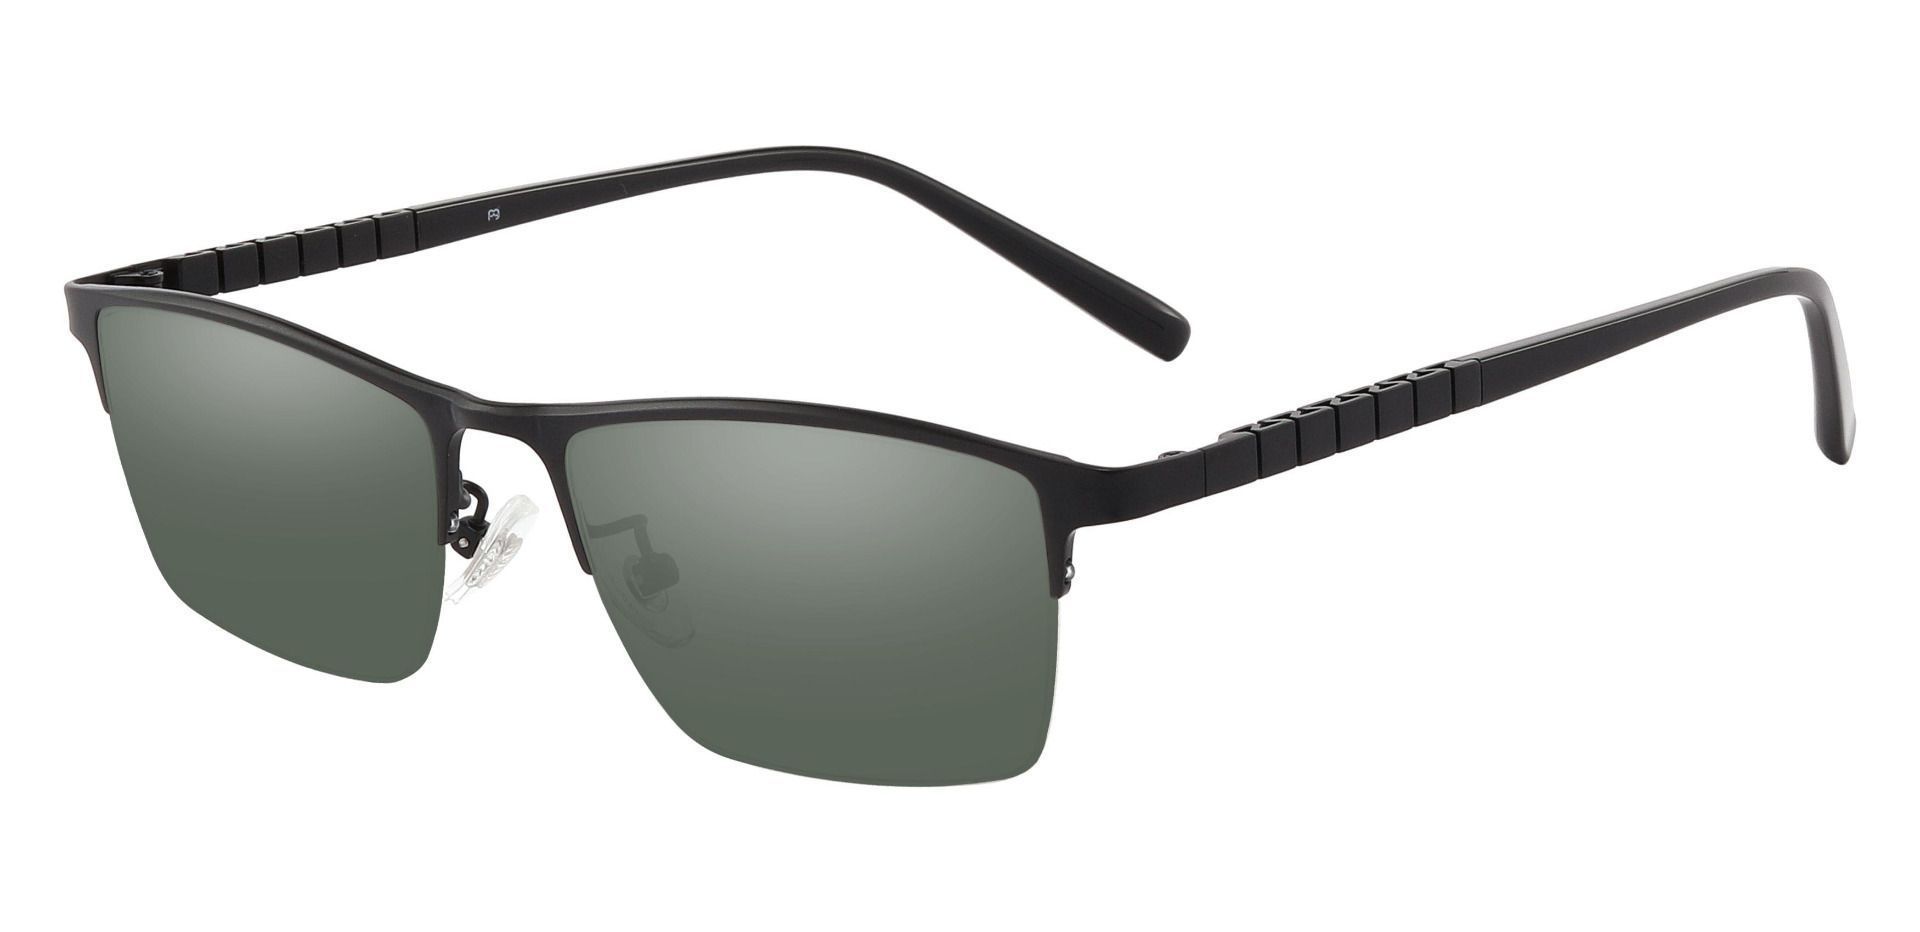 Maine Rectangle Non-Rx Sunglasses - Black Frame With Green Lenses